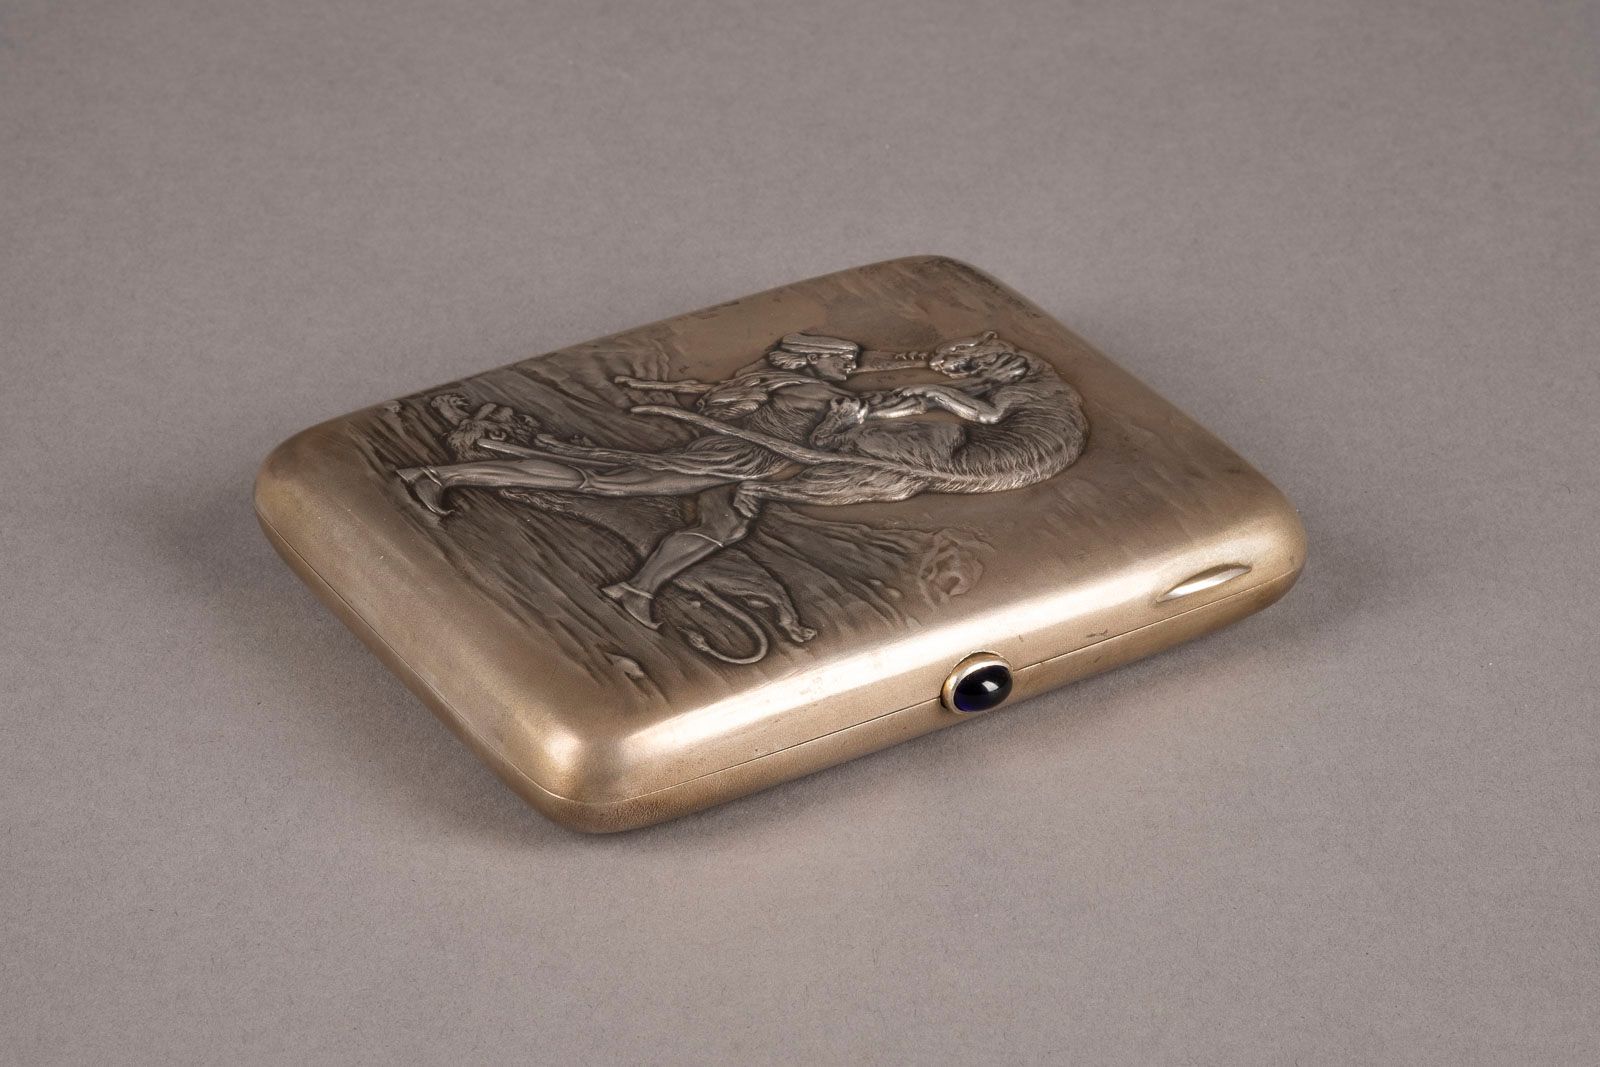 A SILVER CIGARETTE CASE SHOWING THE FIGHT WITH LIONS 显示与狮子搏斗的银制雪茄盒 苏联，1927年后 长方形&hellip;